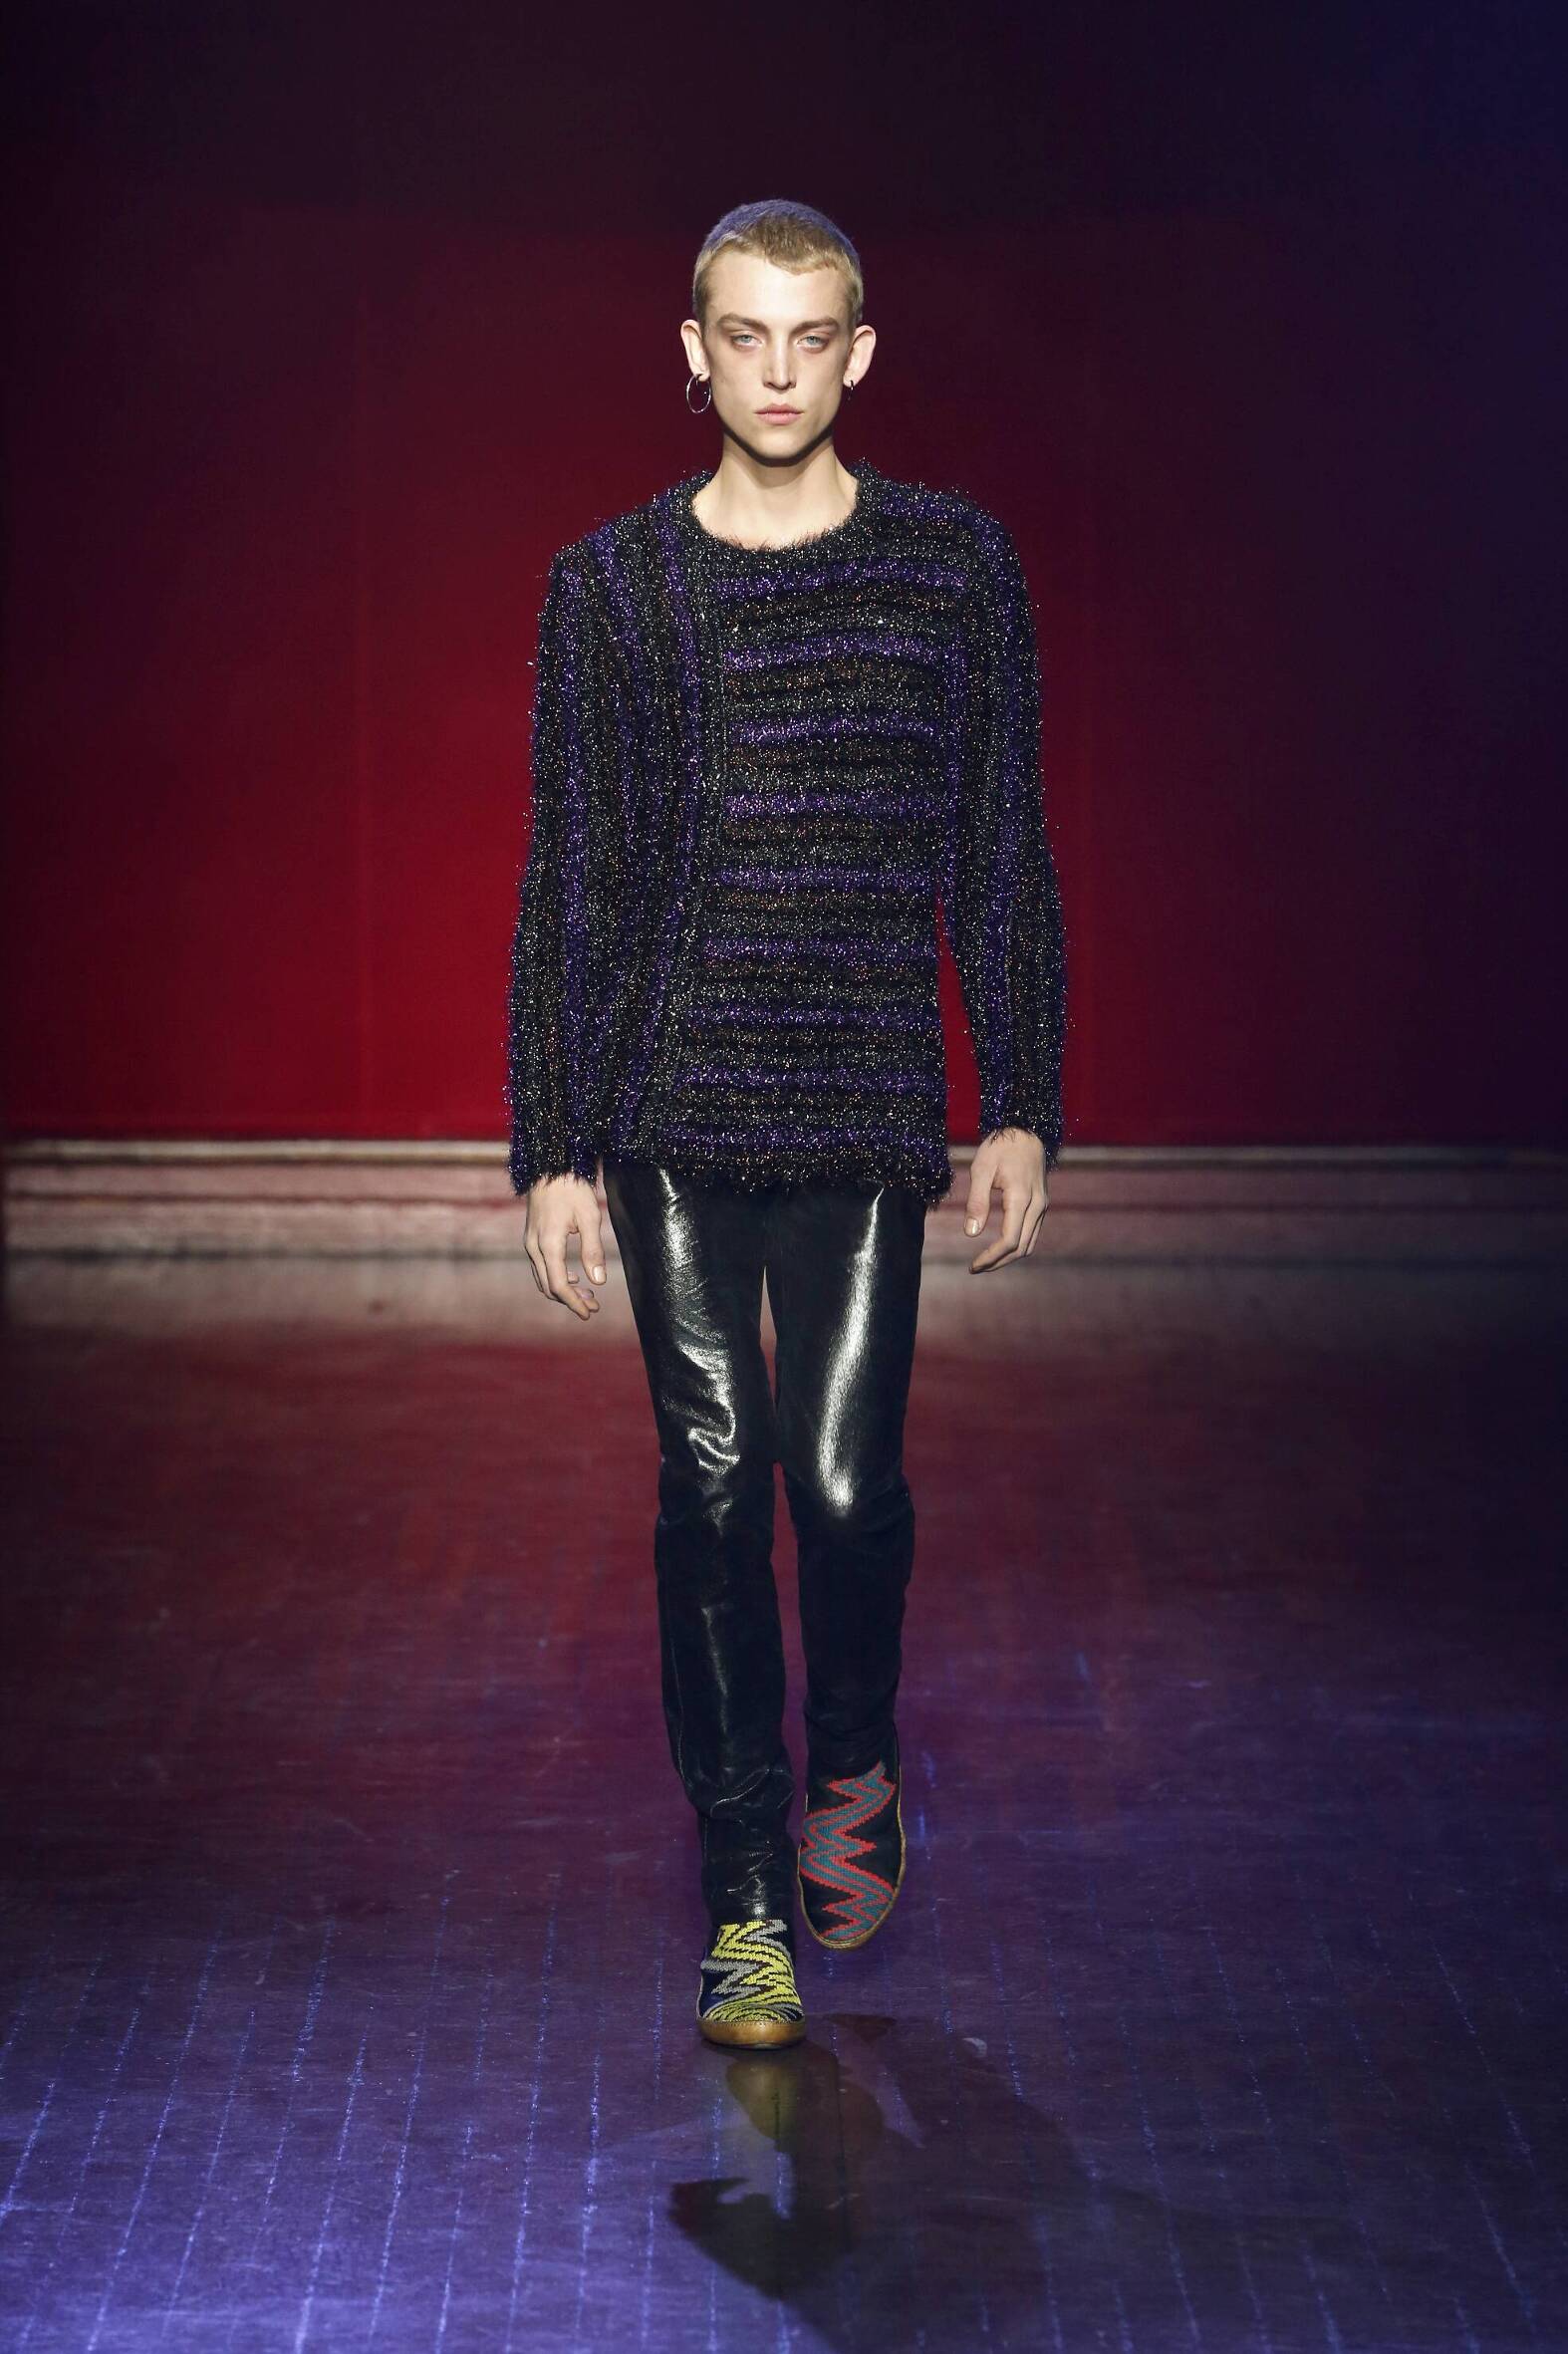 MAISON MARGIELA FALL WINTER 2015-16 MEN’S COLLECTION | The Skinny Beep